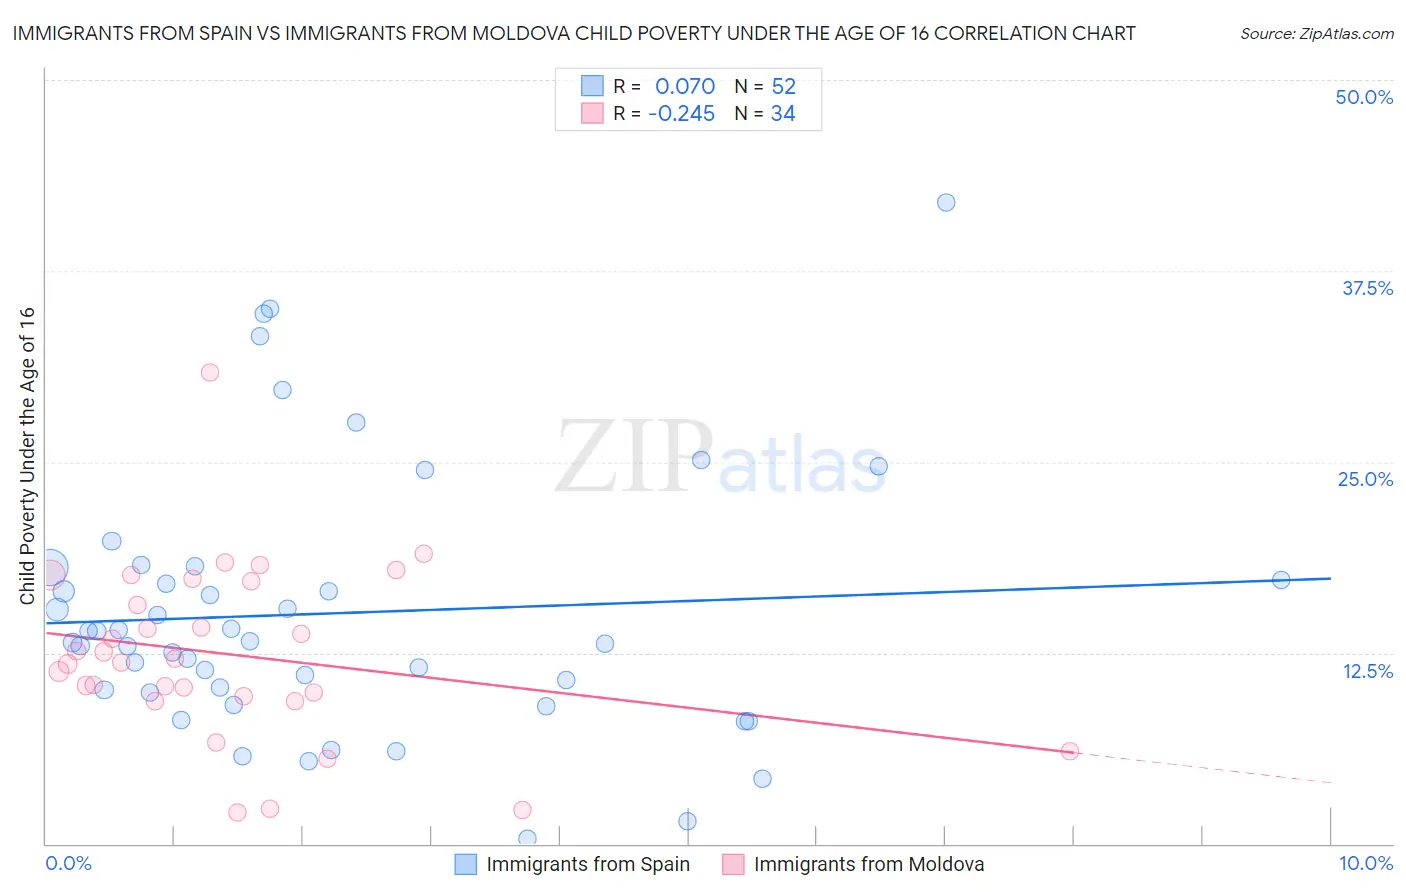 Immigrants from Spain vs Immigrants from Moldova Child Poverty Under the Age of 16